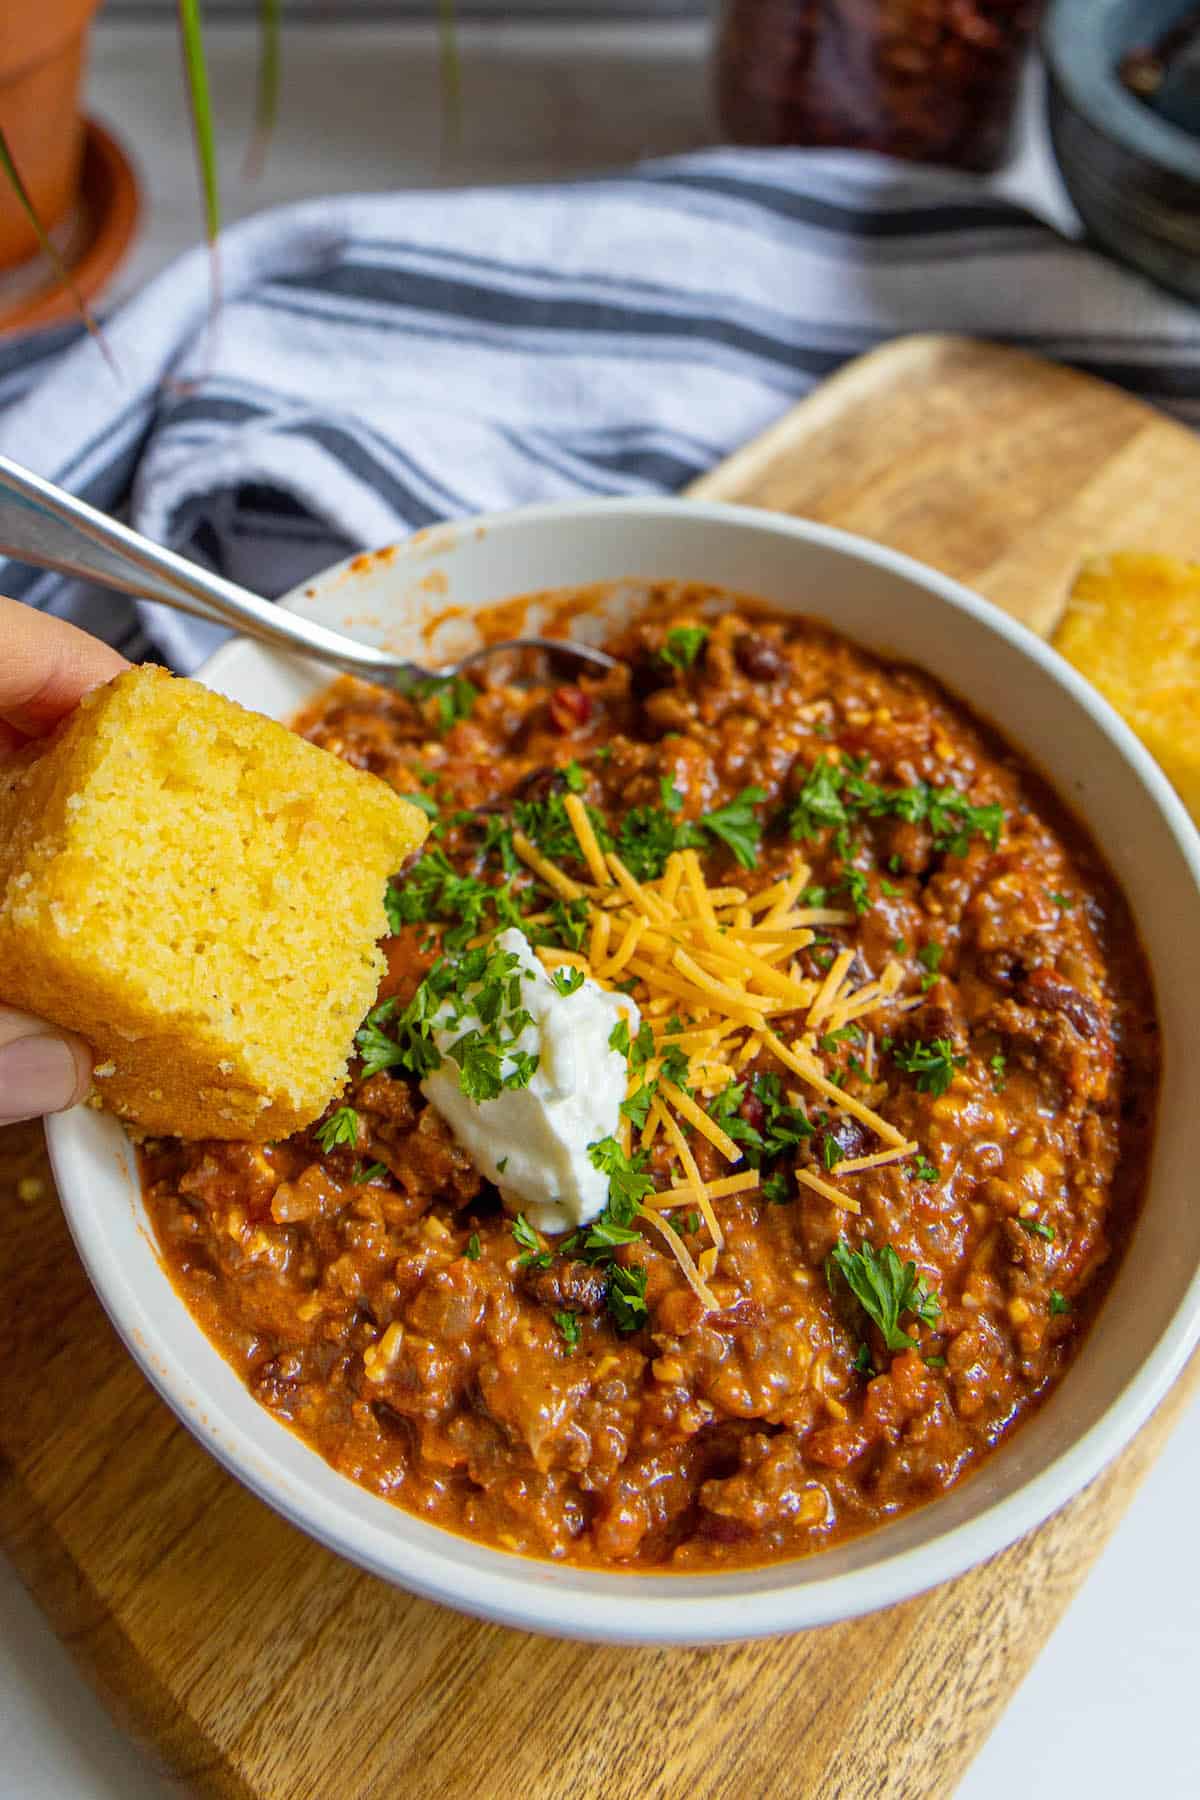 A bowl of chili with cornbread on a cutting board.